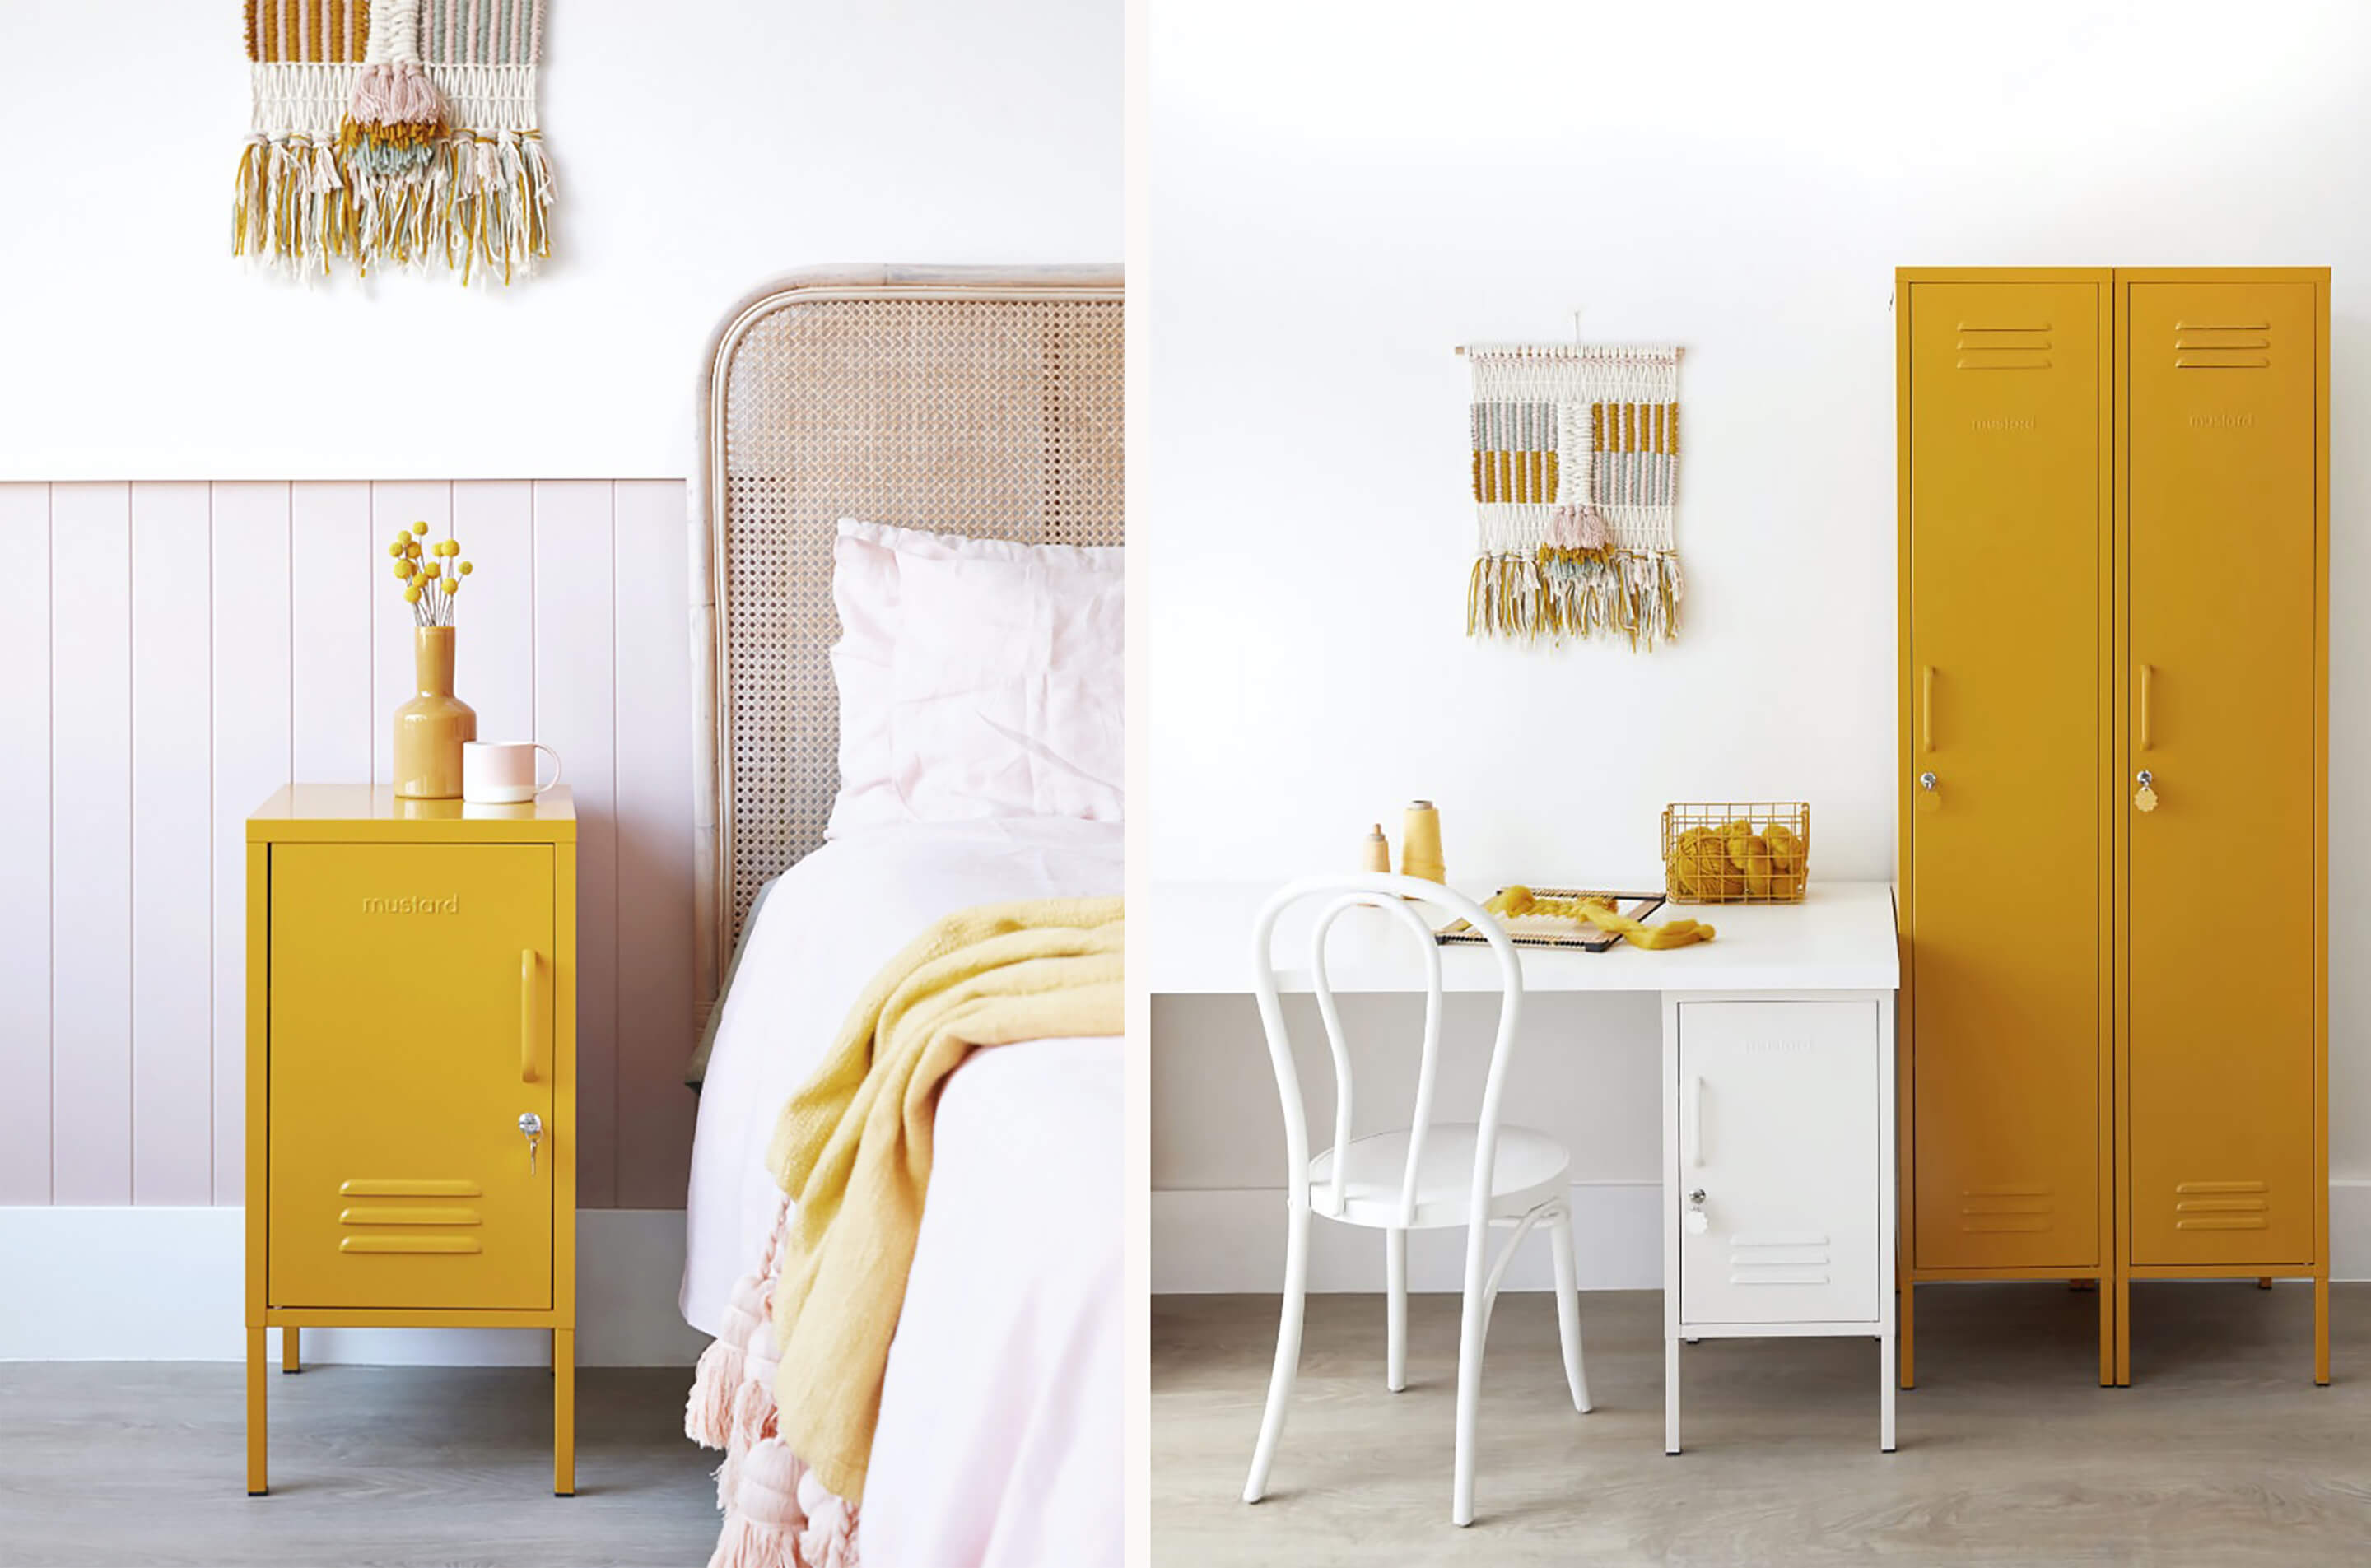 Mustard Made lockers now available to shop online at Life Interiors - great for stylish storage in your home office, living areas, or bedrooms!